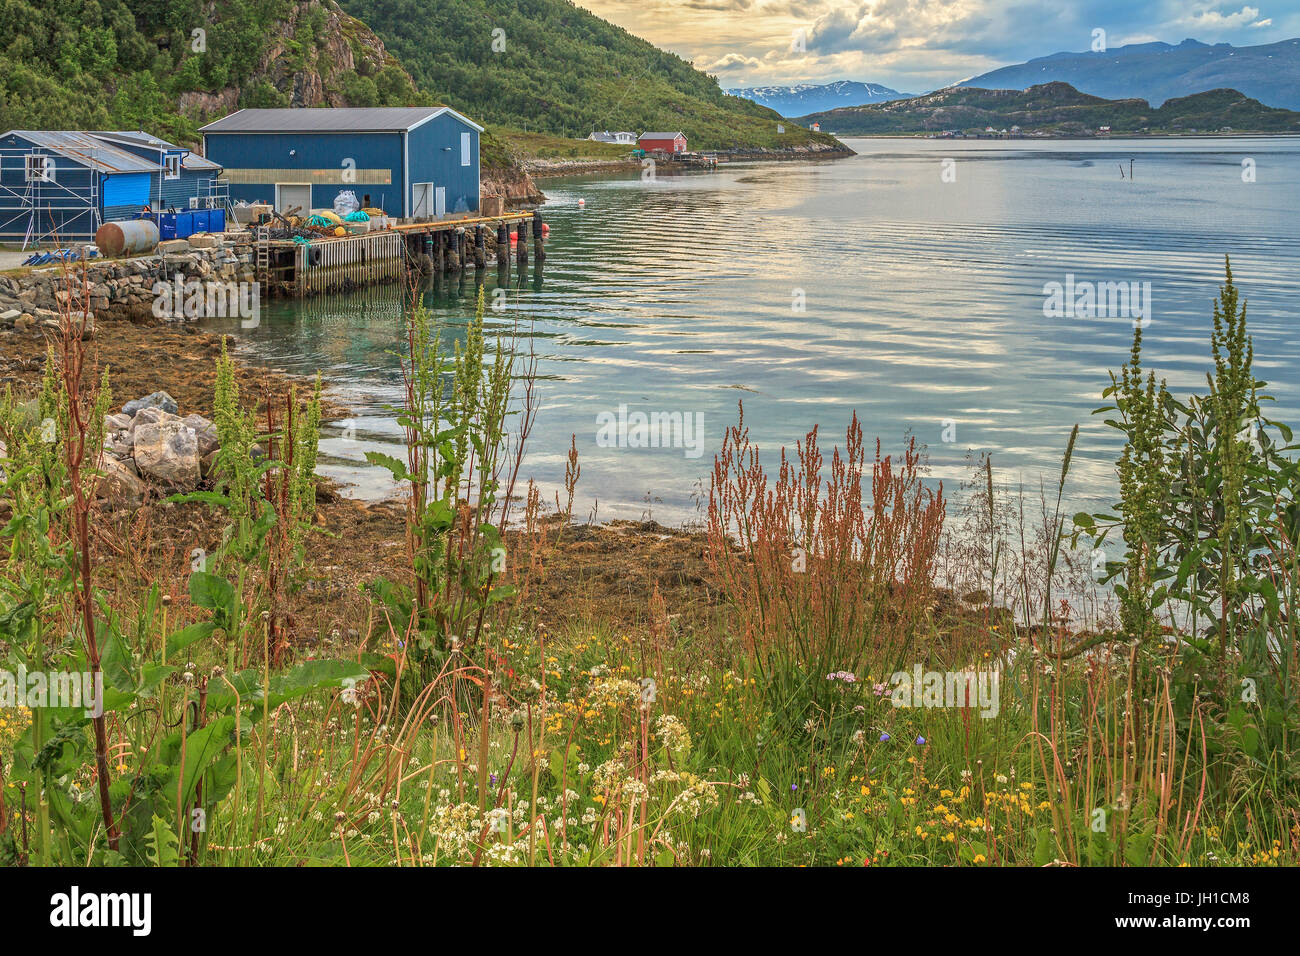 Part Of Harbour At Sommaroy Island Tromso Norway Stock Photo